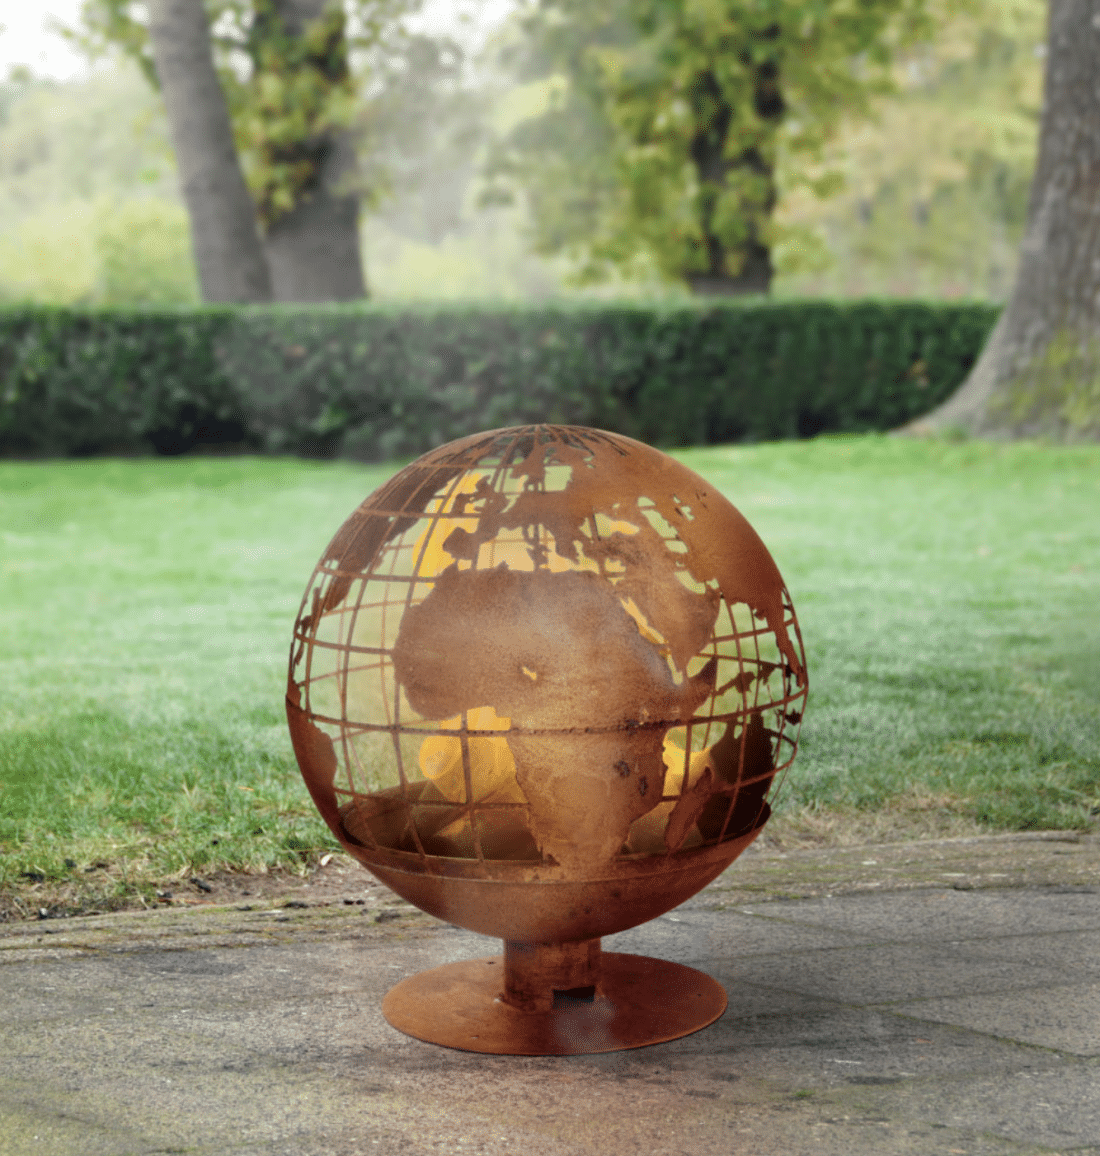 Trp Post Container Data Trp Post Id 8402 Fire basket Garden Fireball Laser Cut Rust With Globe Motif Trp Post Container